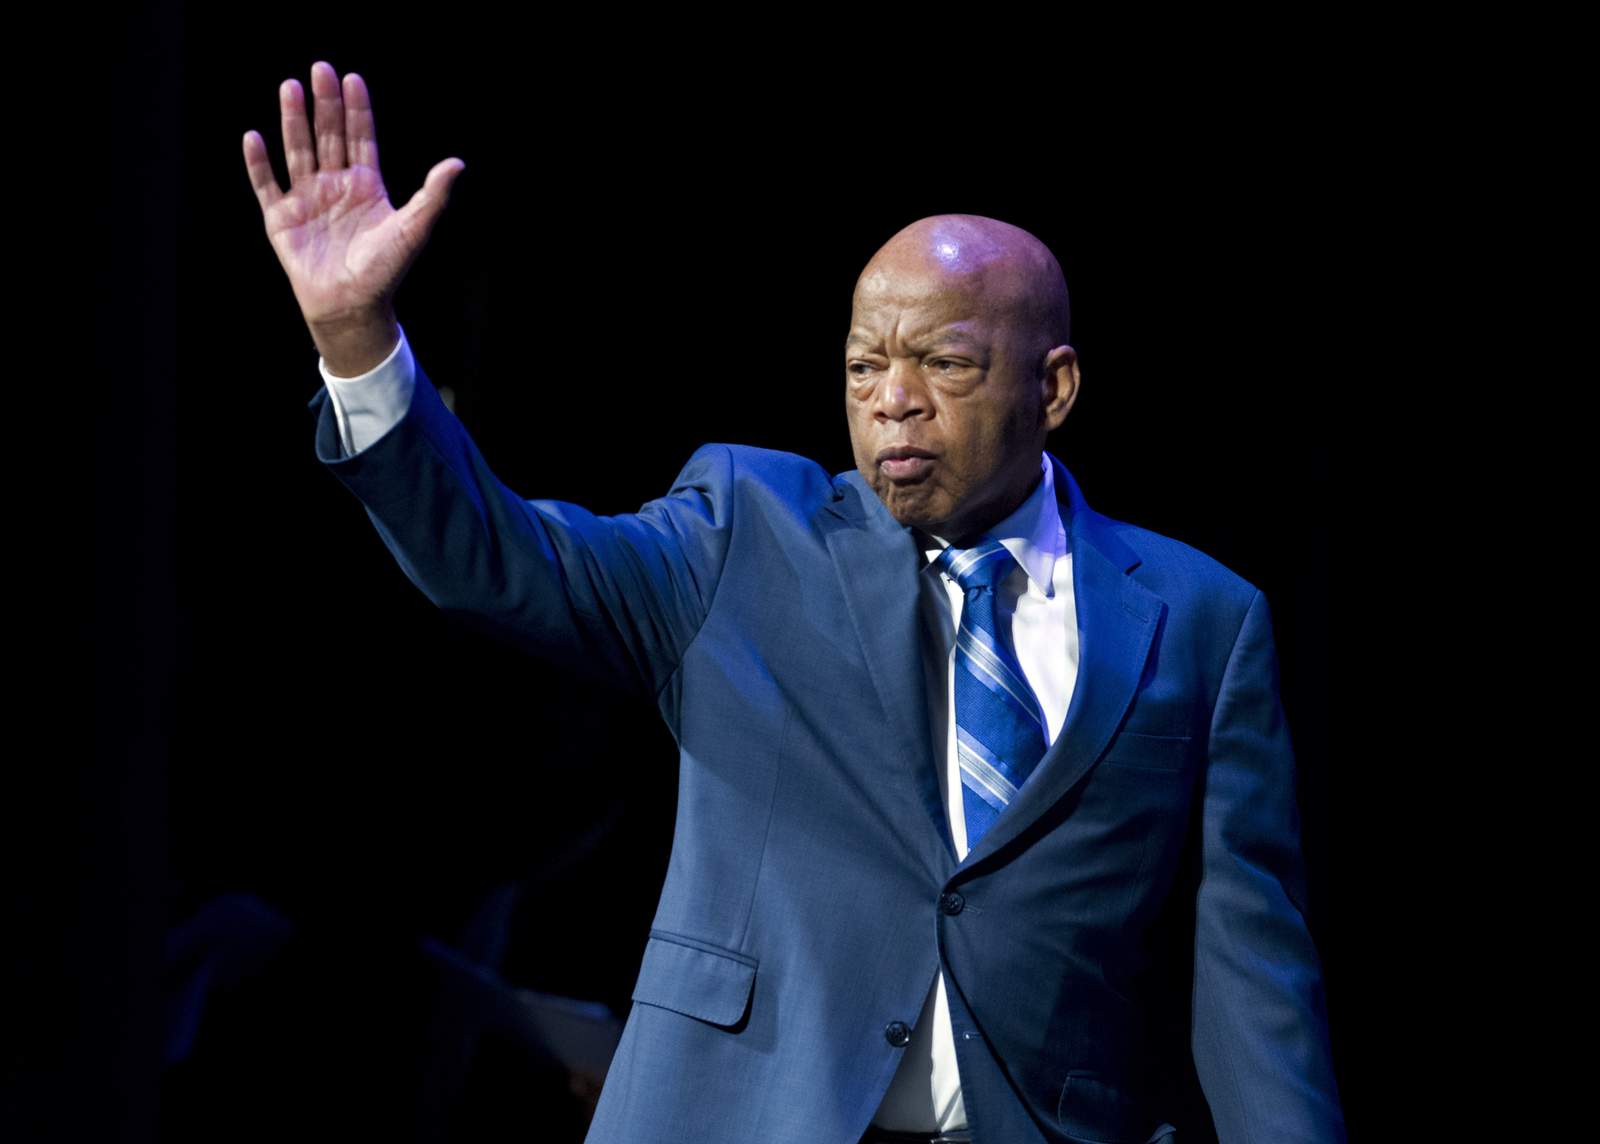 LIVE STREAM: Civil rights icon John Lewis remembered at US Capitol ceremony